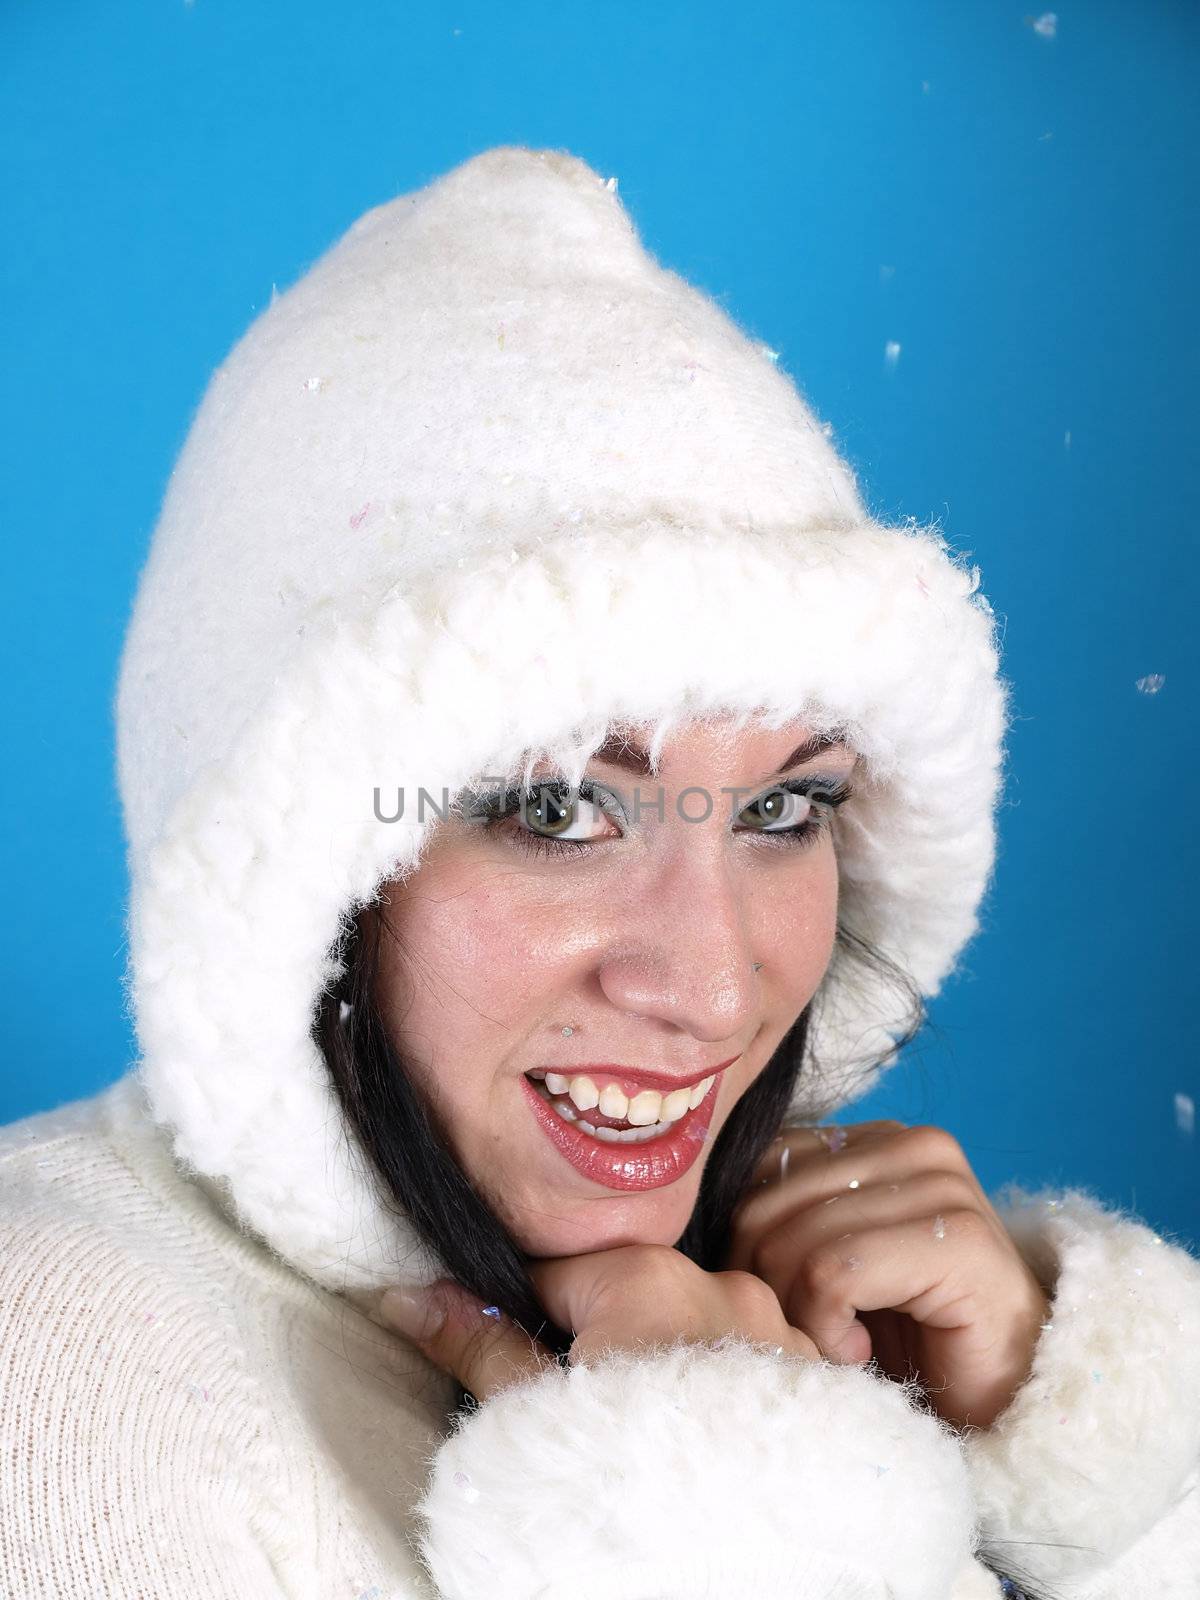 Beautiful brunette in a white hooded sweater, artificial snow falling down around her, against a blue background.